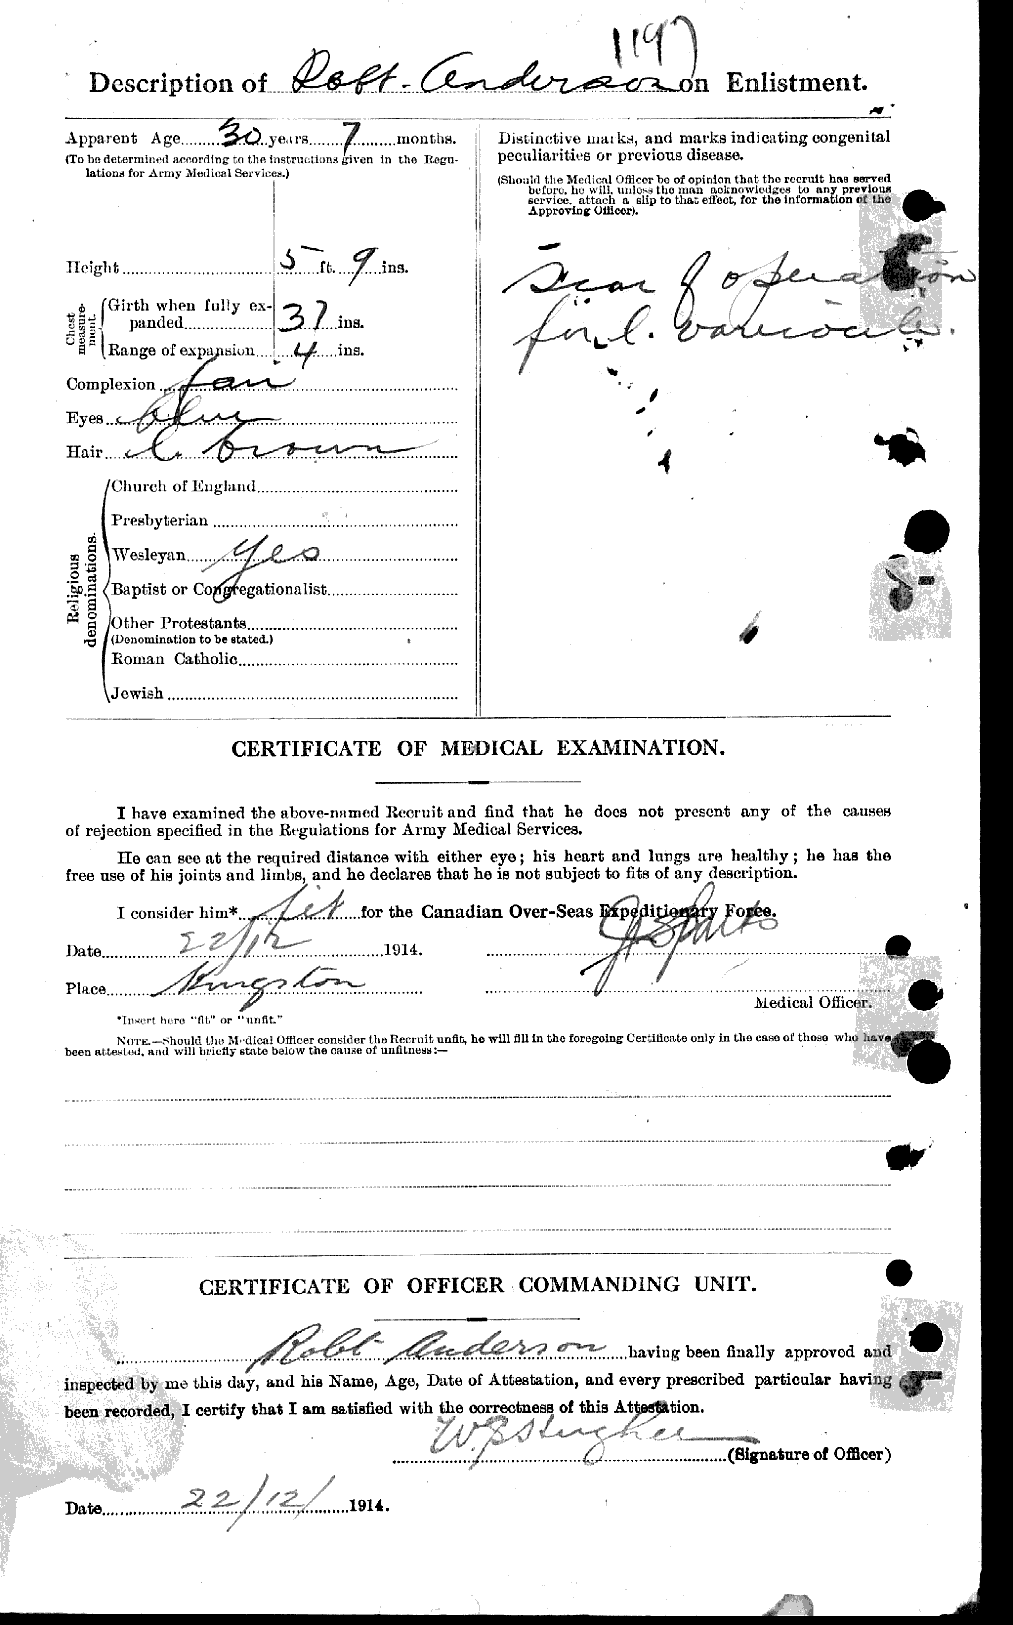 Personnel Records of the First World War - CEF 051283b